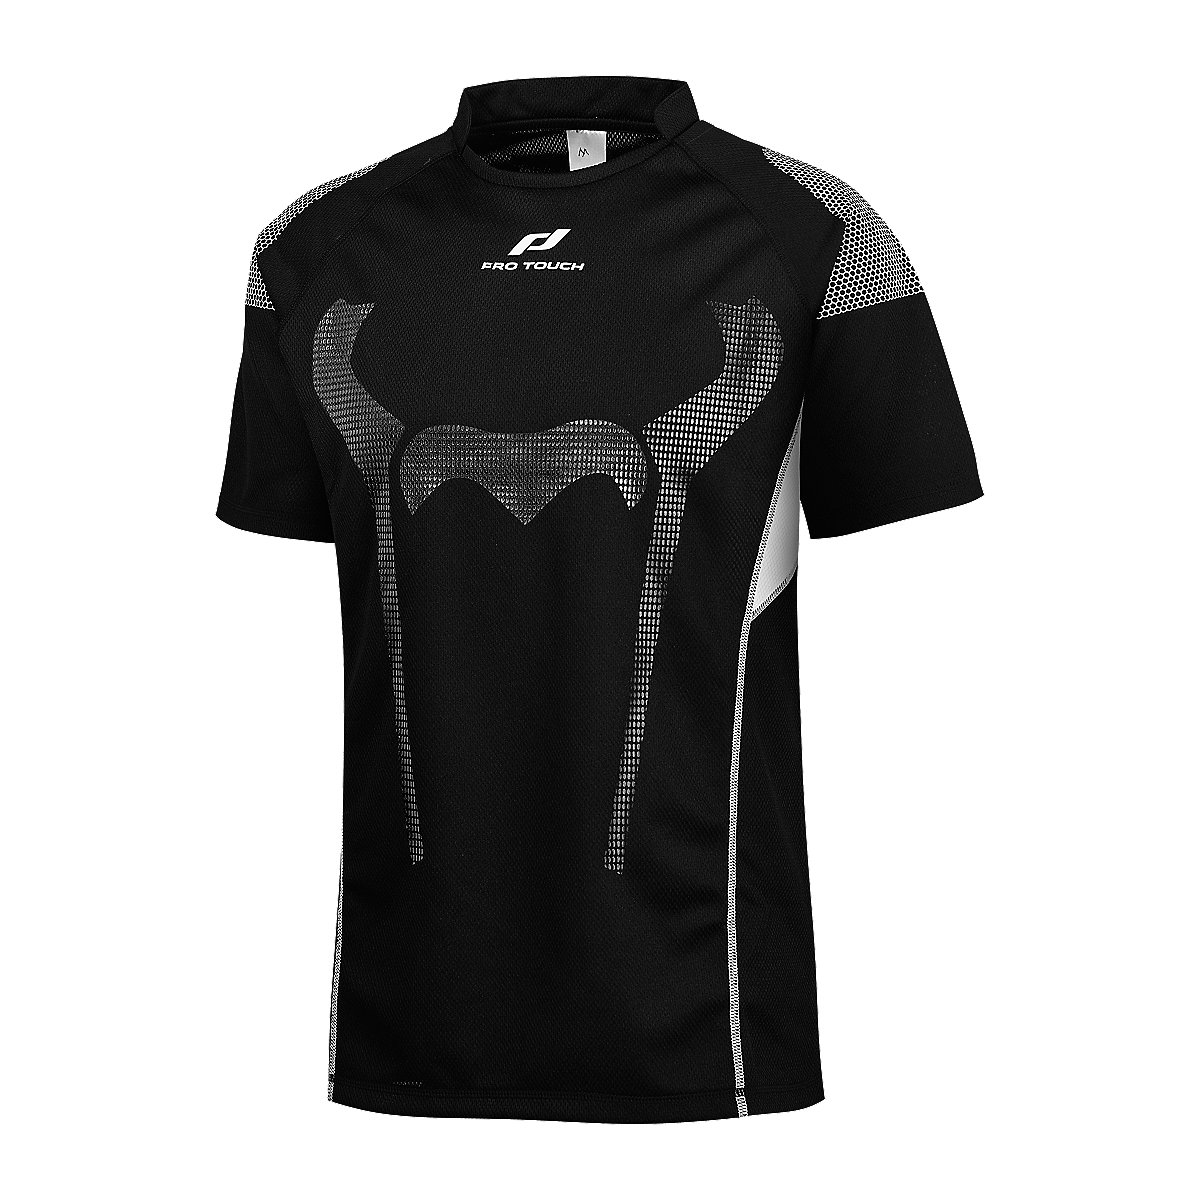 maillot de rugby homme maillot rugby adulte